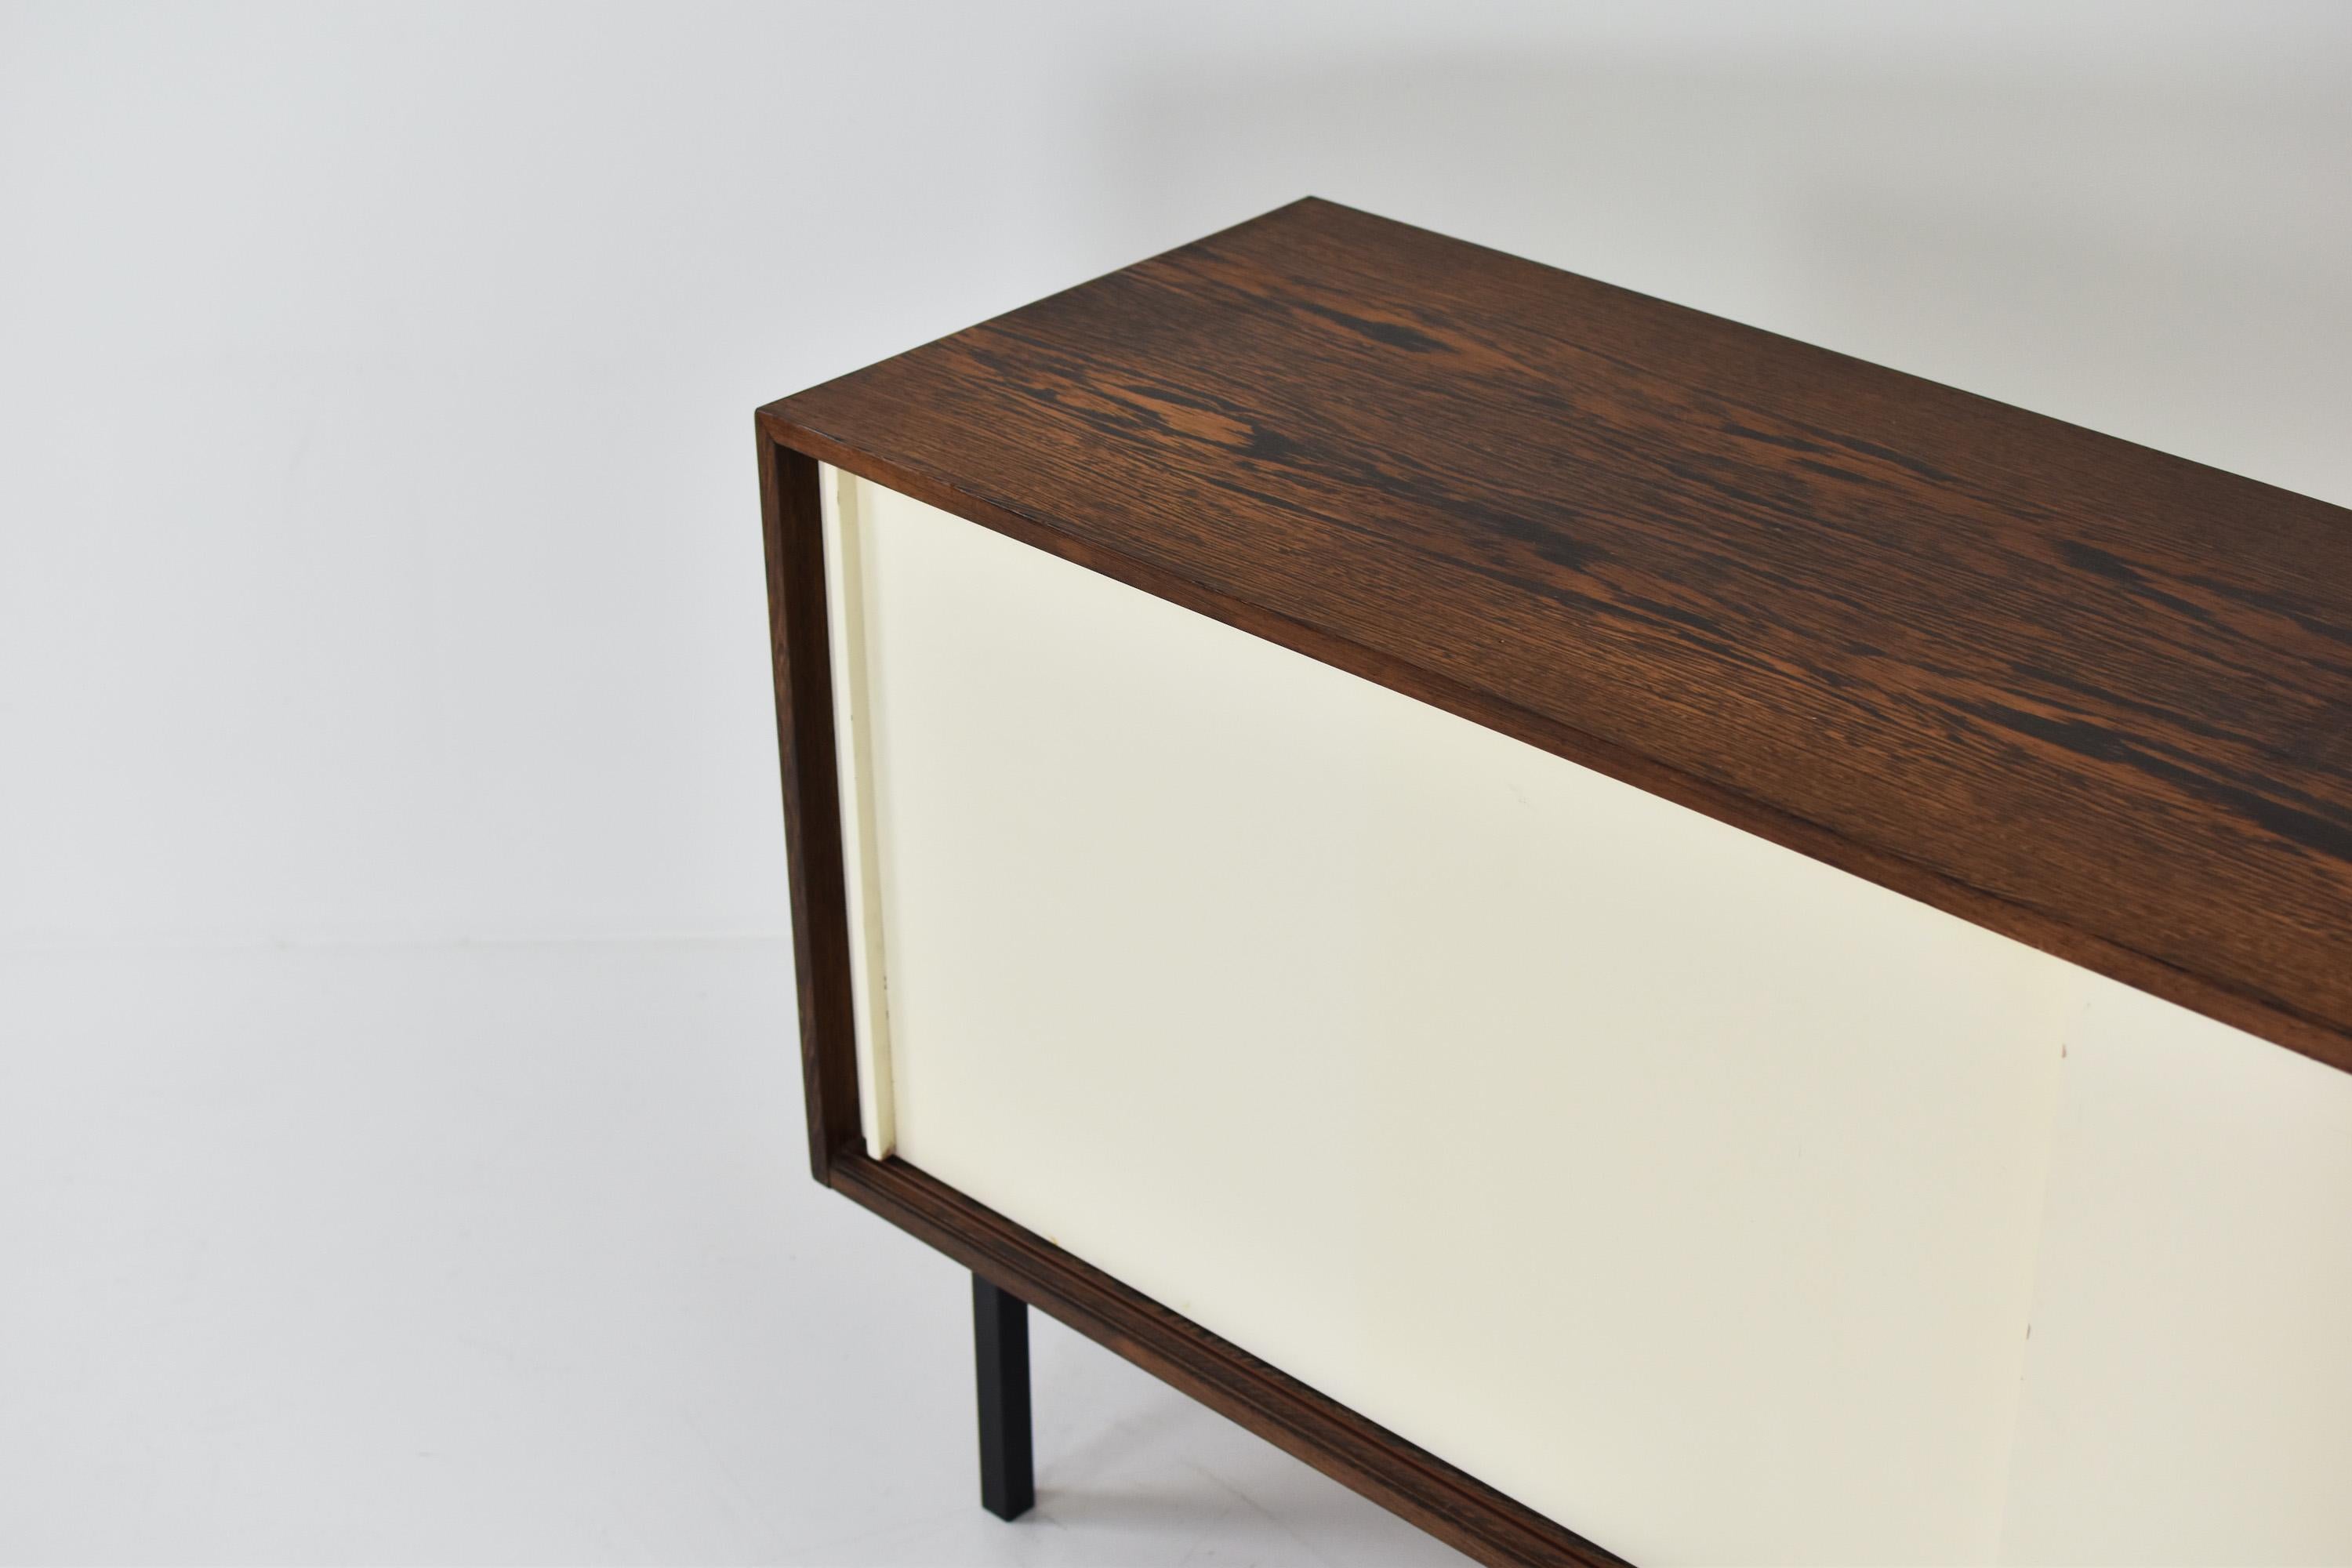 Dutch Sideboard by Martin Visser and Jos Manders for ‘t Spectrum, The Netherlands 1958